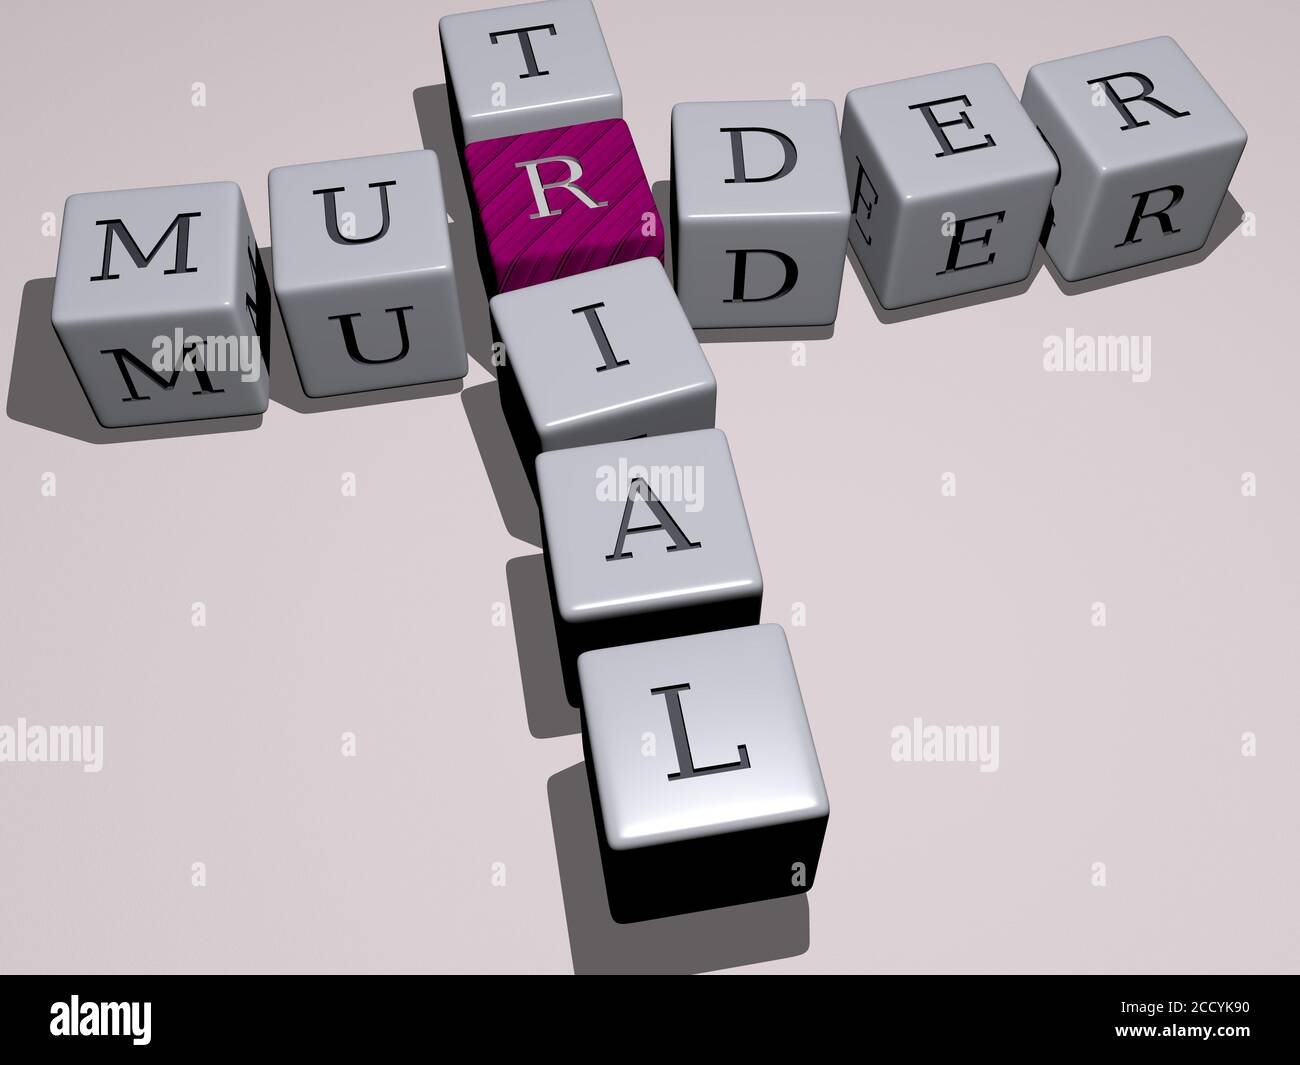 murder trial crossword by cubic dice letters, 3D illustration Stock Photo